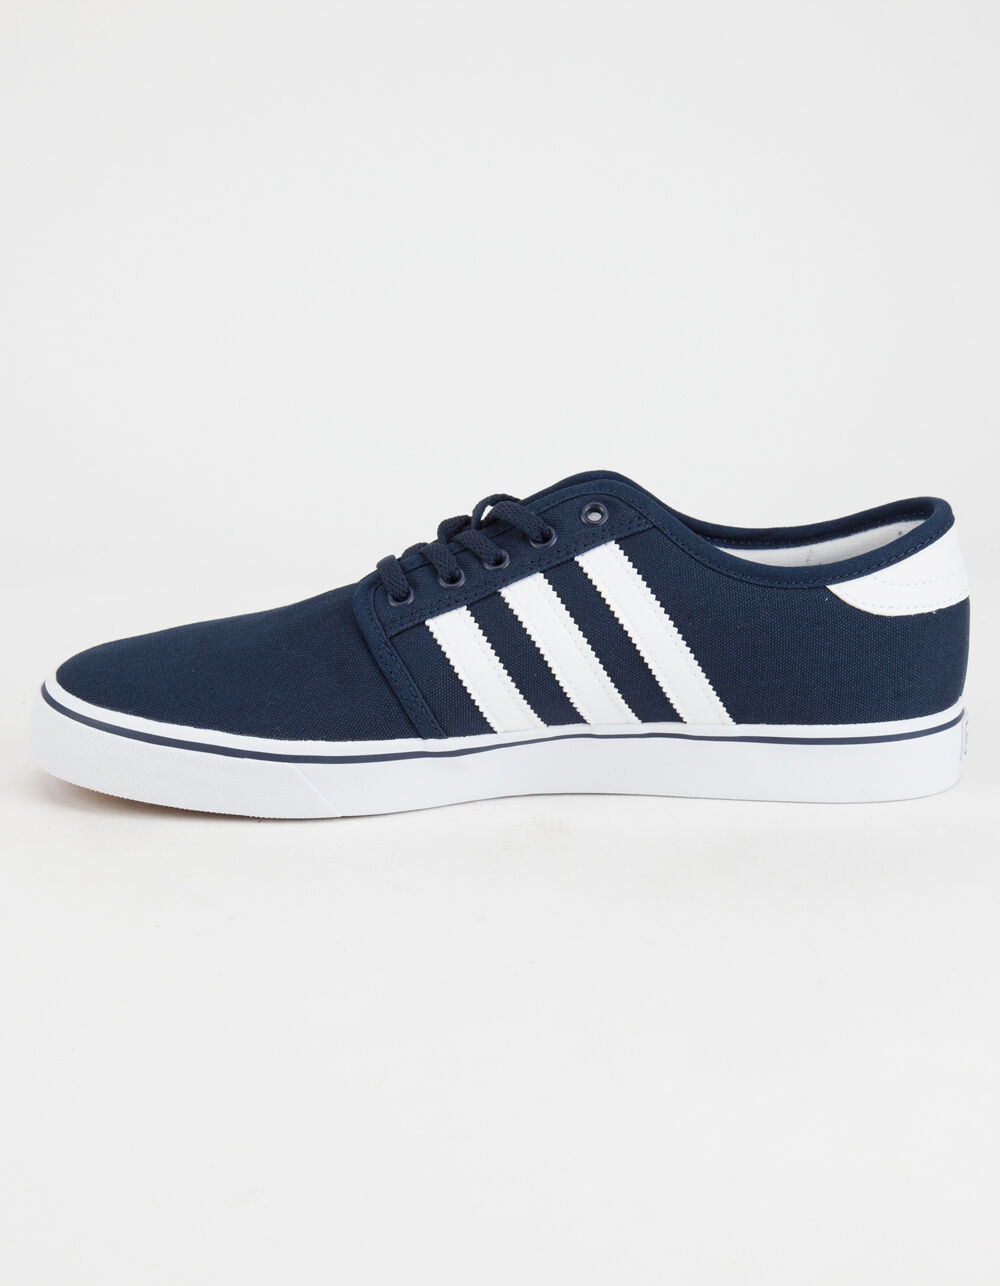 ADIDAS Seeley Mens Shoes - NAVY | Tillys